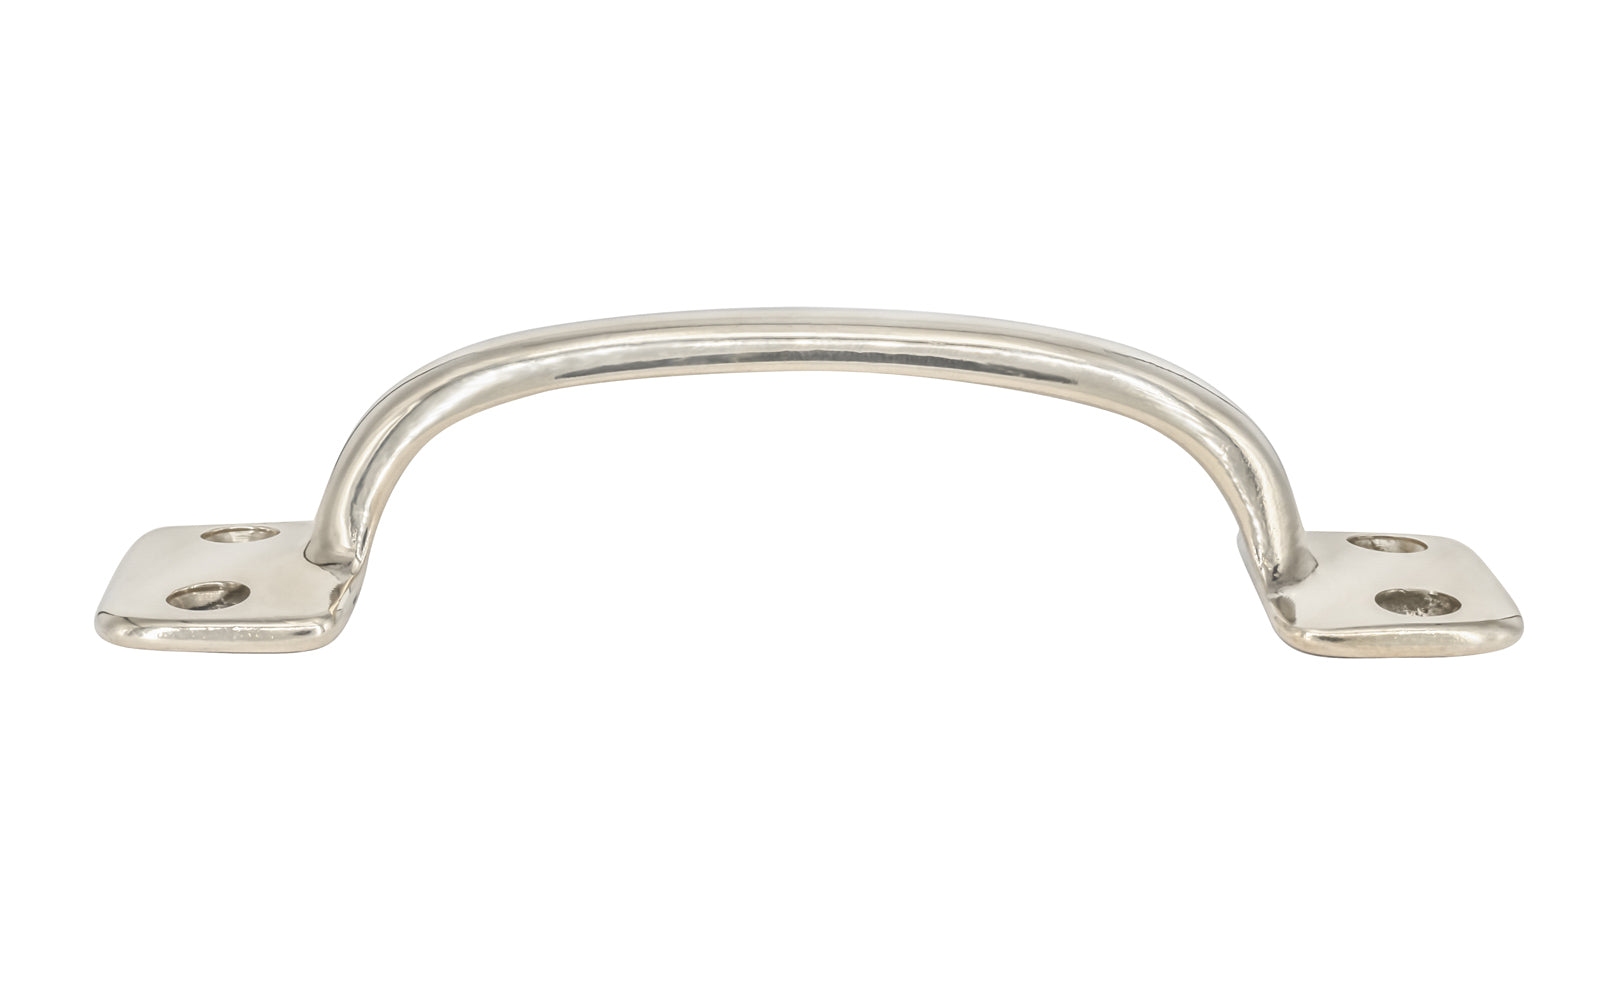 Vintage-style Hardware · Classic Solid Brass Handle Pull ~ 4" On Centers. Versatile handle is great for sash windows, cabinets, drawers, file cabinets. Arts & Crafts handle pull. Polished Nickel Finish.